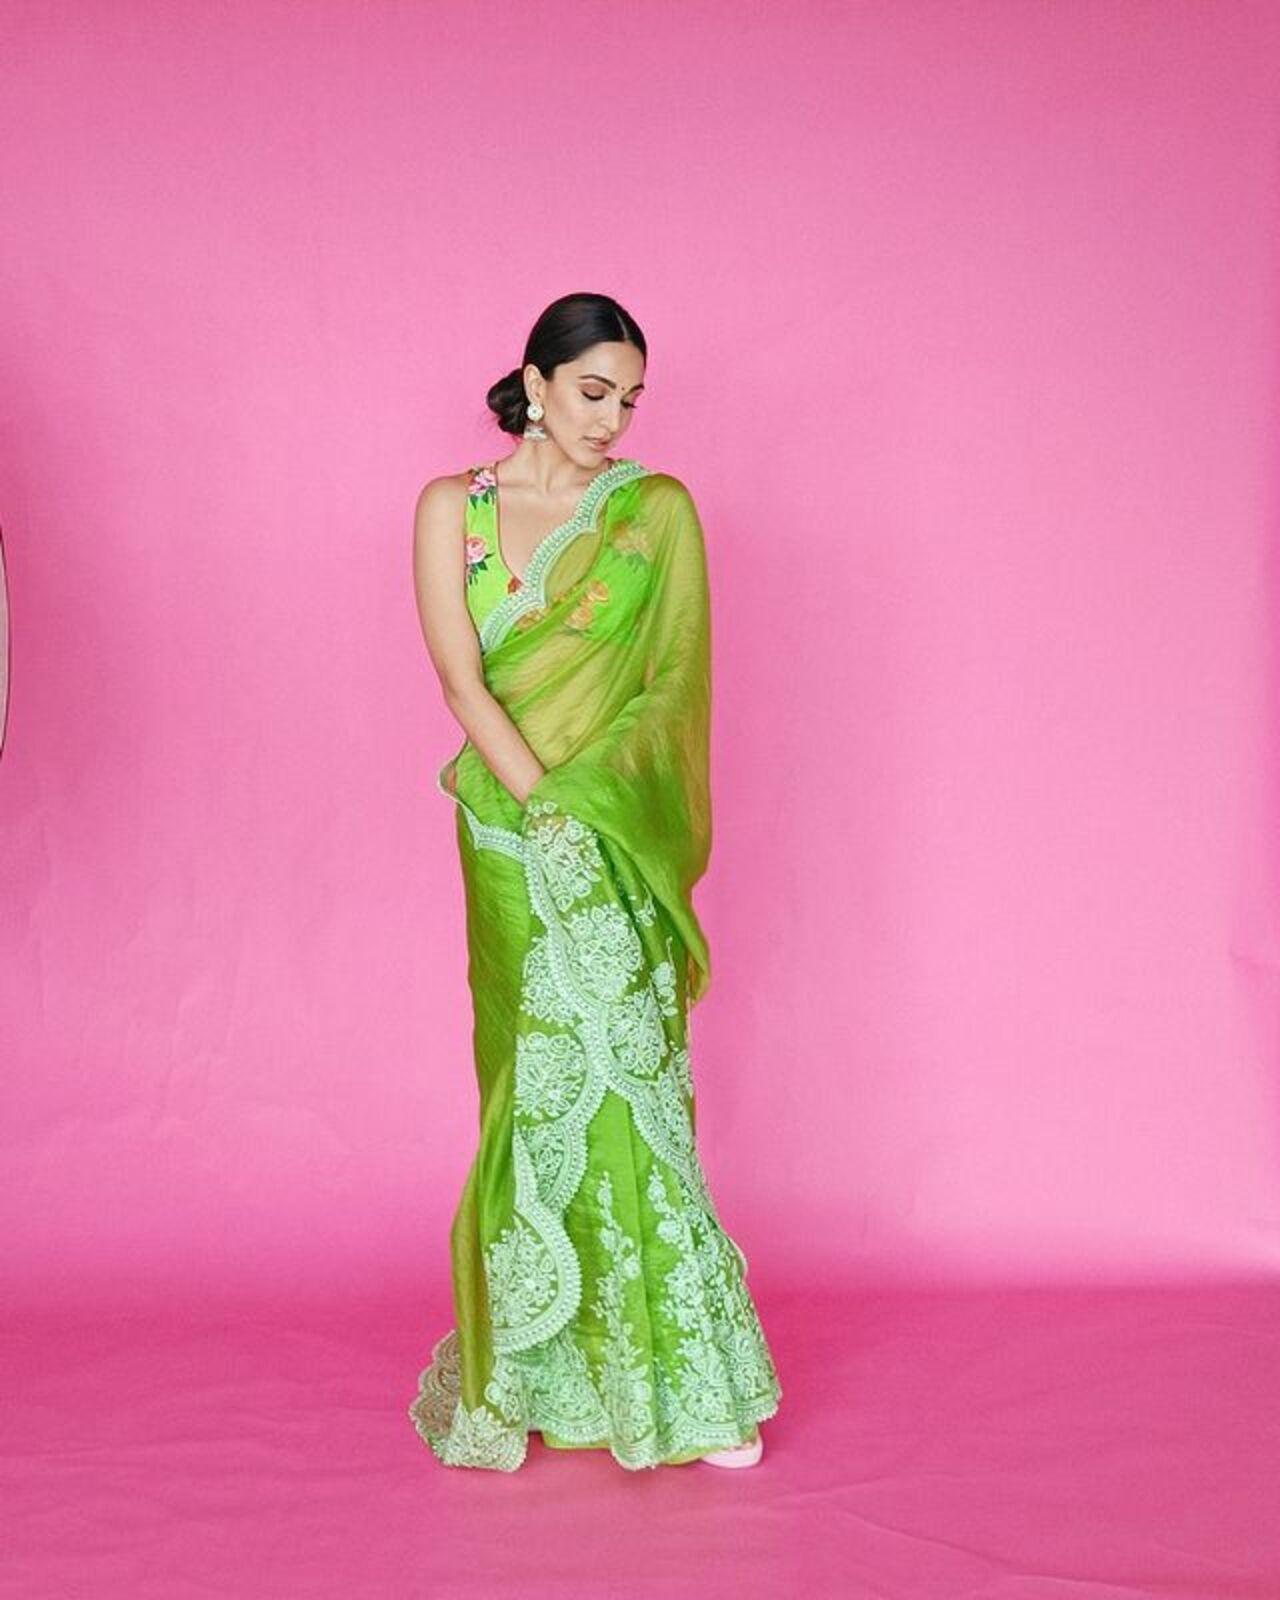 For humid weather, opt for an airy, unique saree like Kiara Advani's light green net saree, perfect for Hariyali Teej. Pair it with a matching sleeveless blouse. Style your hair in a bun or ponytail, accentuate with a bindi, subtle blush, and nude makeup. Finish the look with silver jhumkas and glass bangles